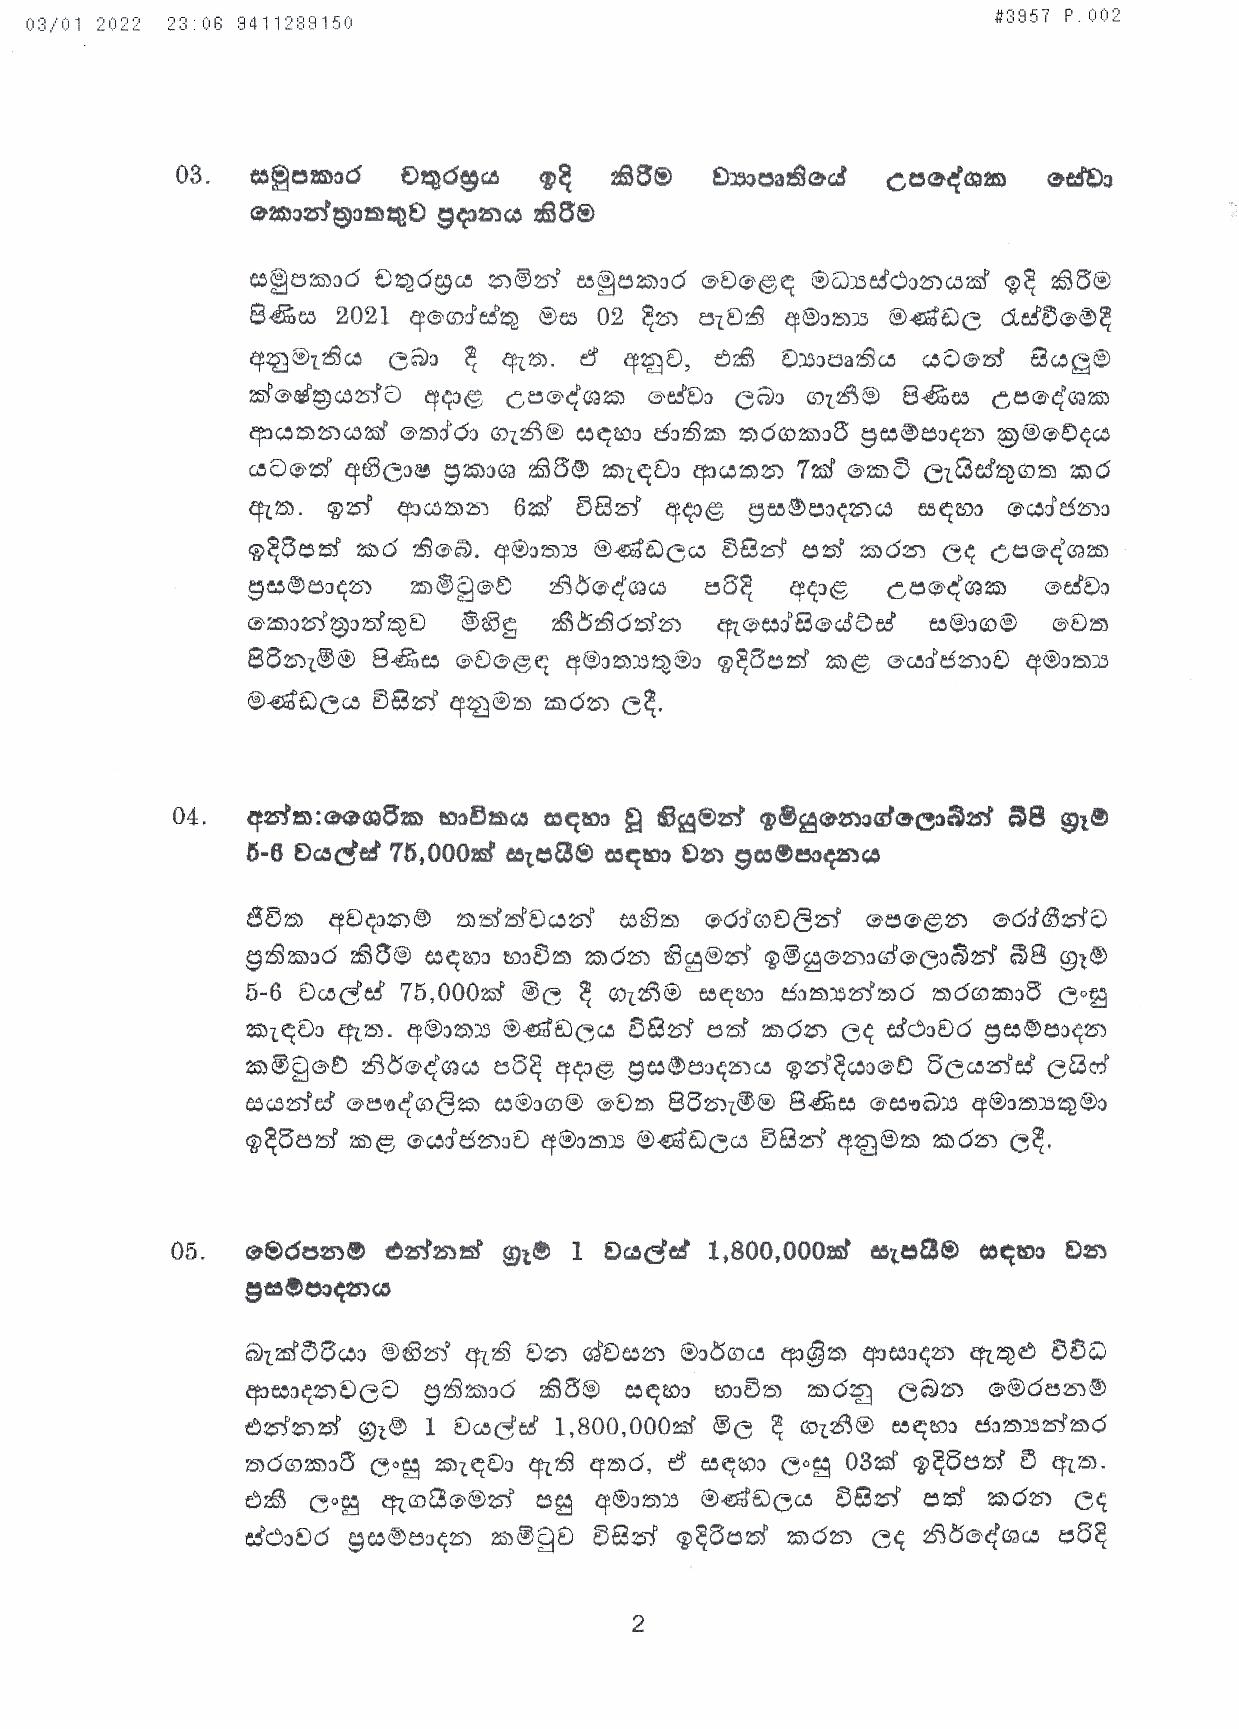 Cabinet Decision on 03.01.2022 page 002